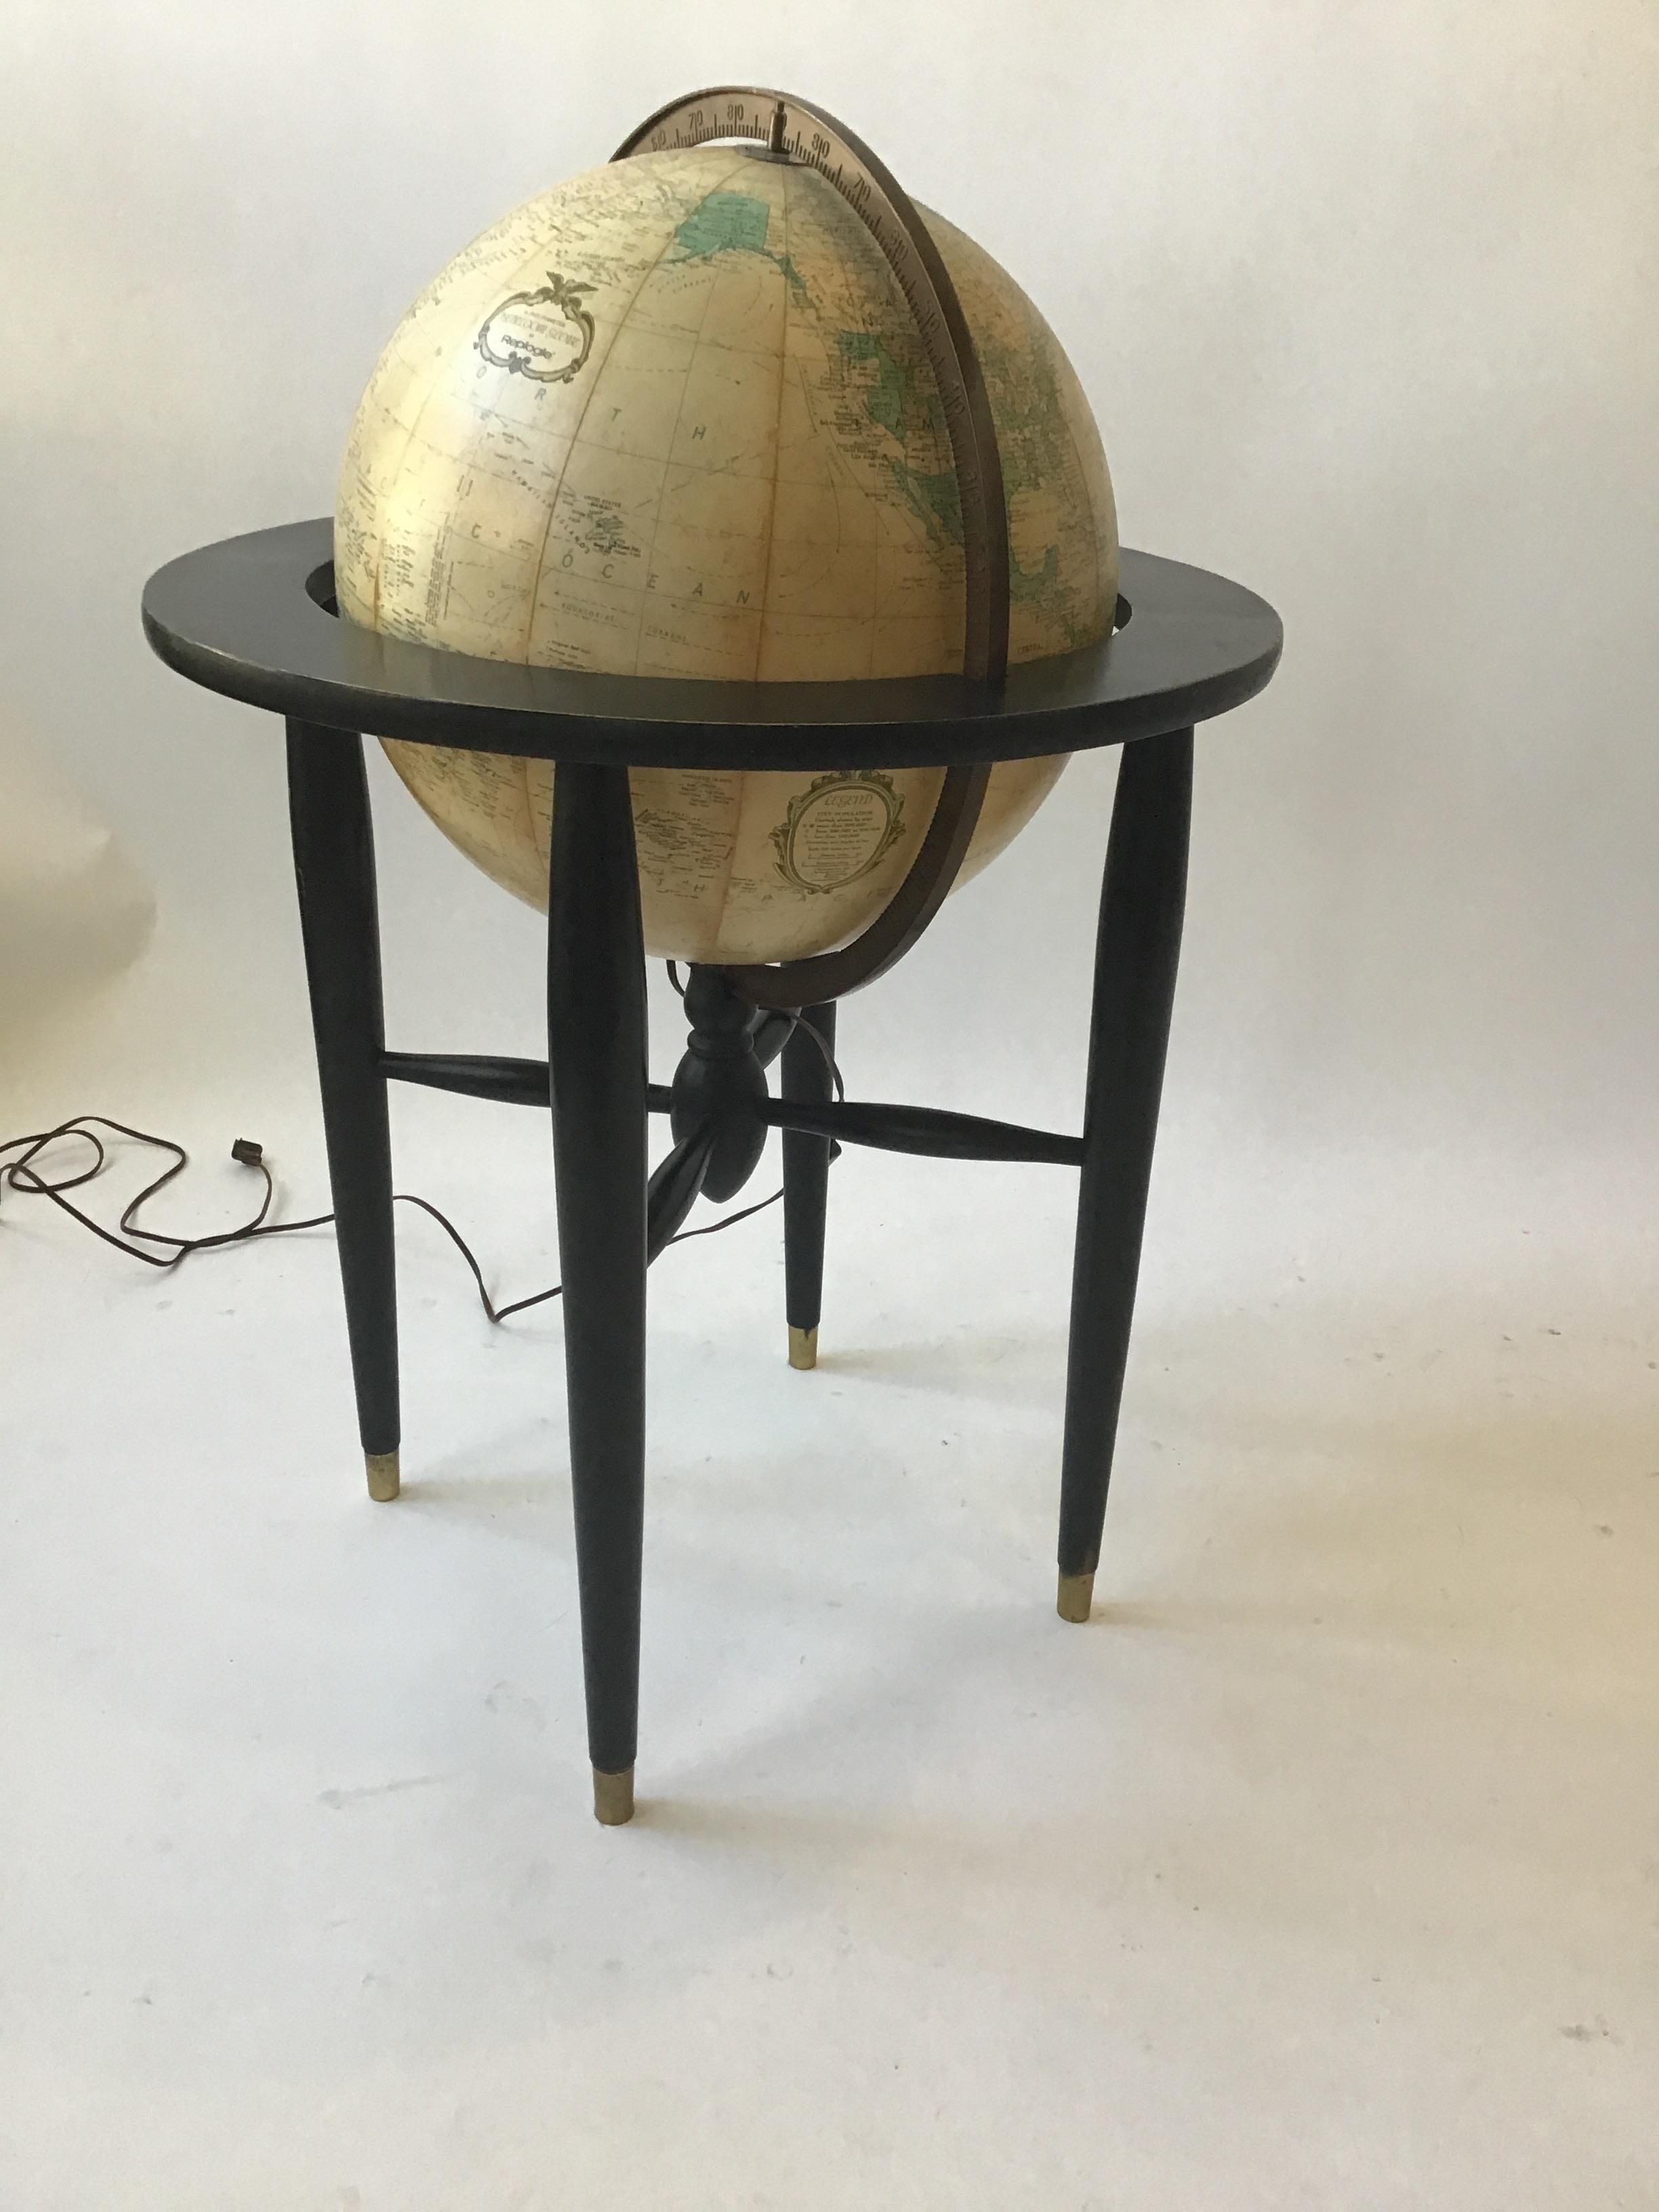 1950s 16 inch diameter heirloom globe by Replogle. Wood frame, brass accents.
Globe lights up, once rewired. It currently does not.